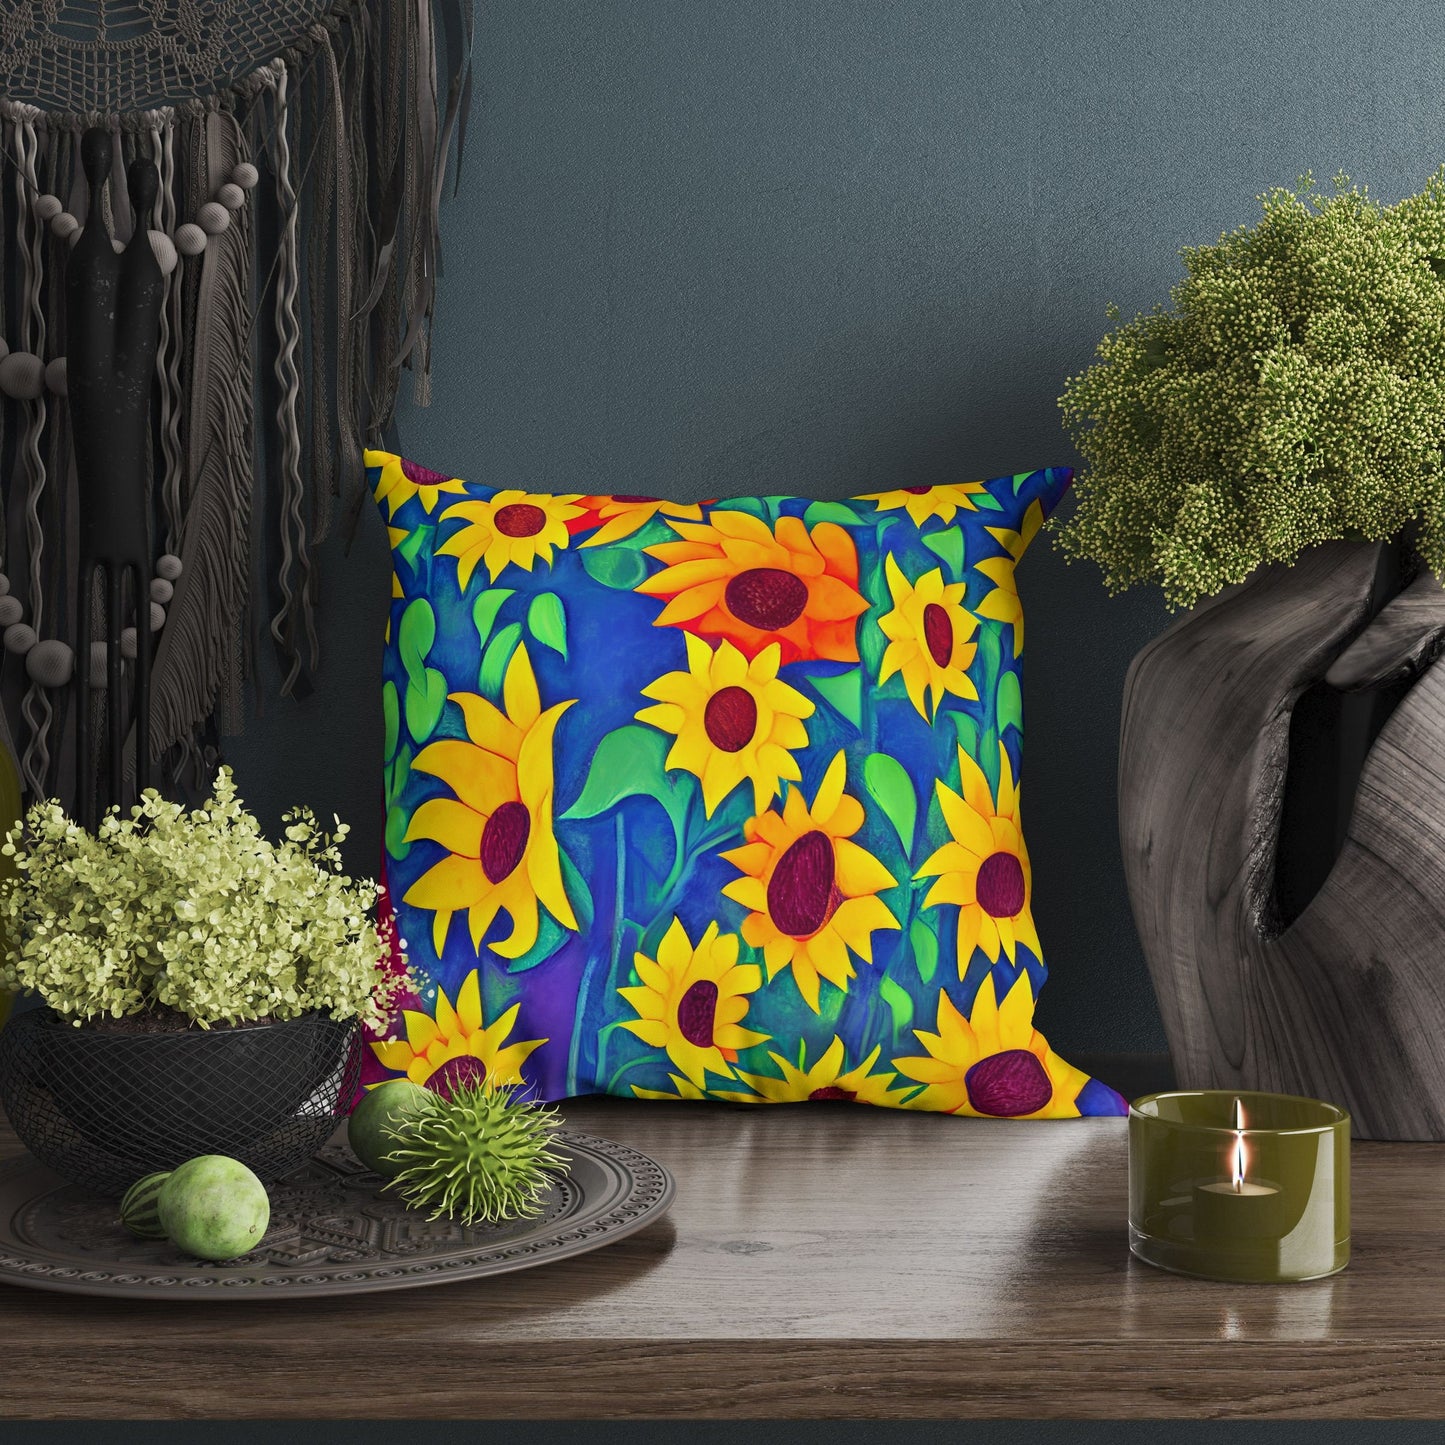 Sunflowers, Decorative Pillow, Floral Pillow, Soft Pillow Cases, Colorful Pillow, Watercolor Pillow Cases, Housewarming Gift, Holiday Gift